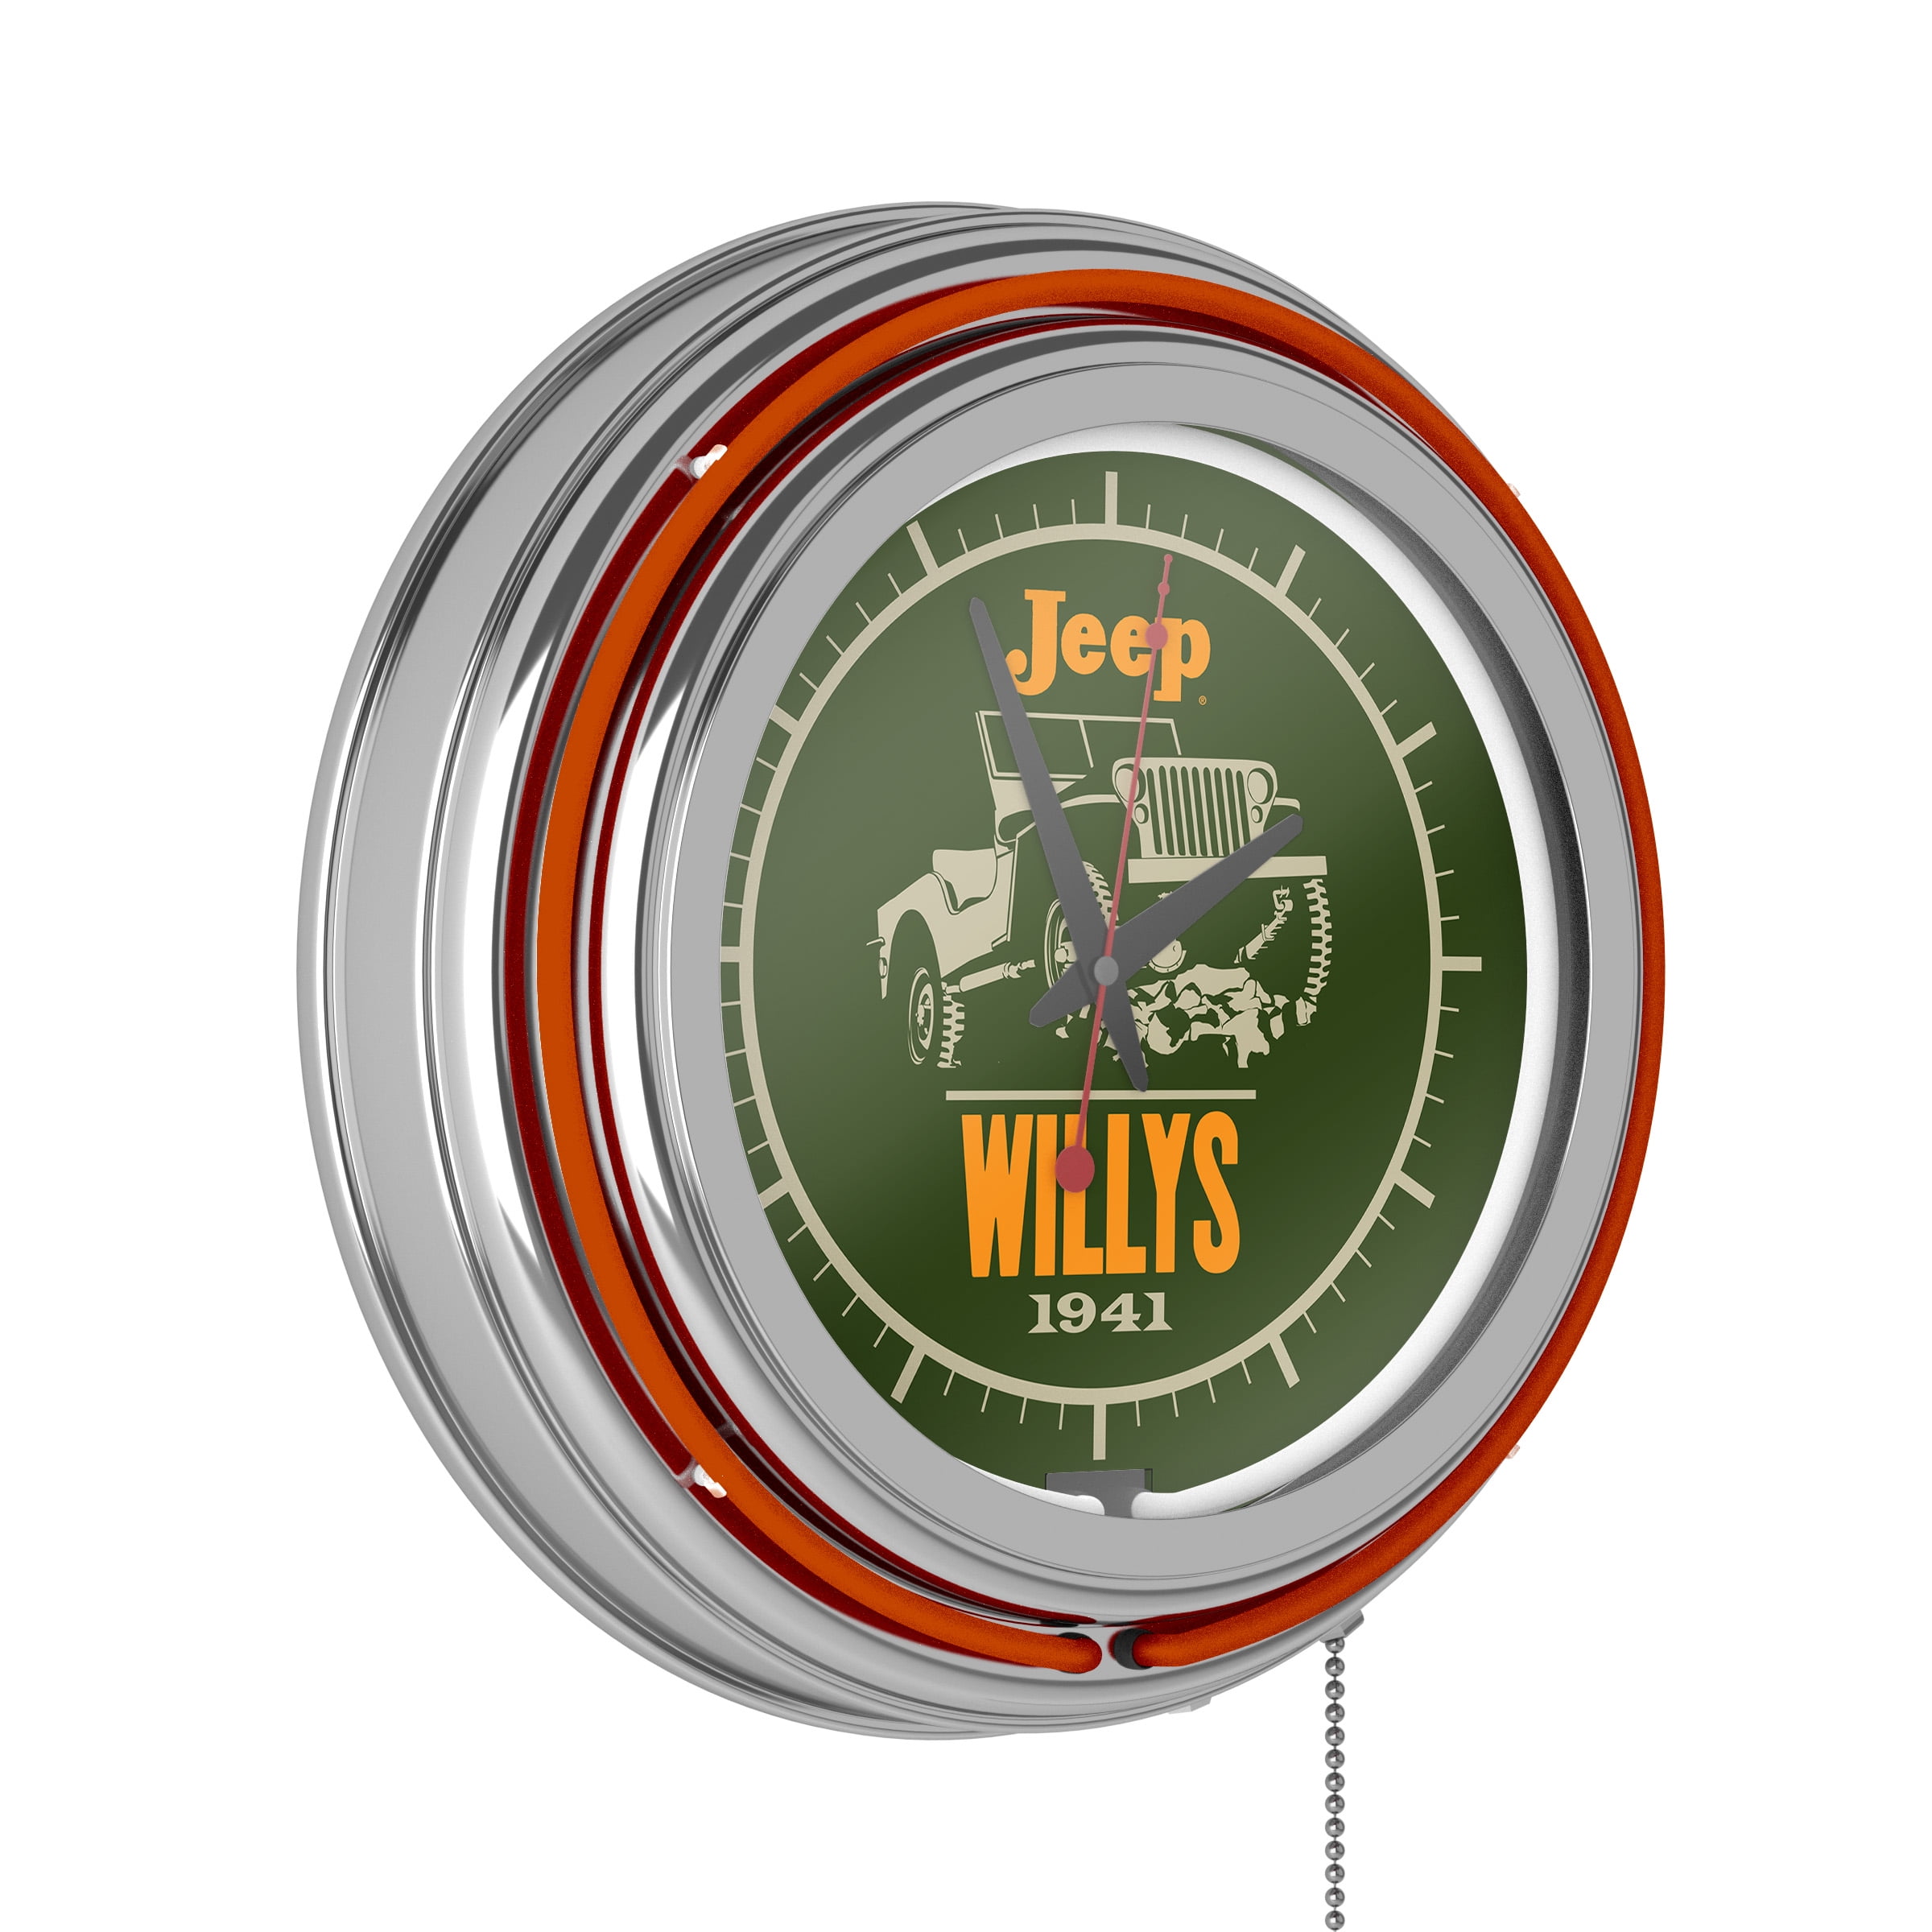 Willys Jeep Sales Parts Service Dealer Auto Car Sign Wall Clock 